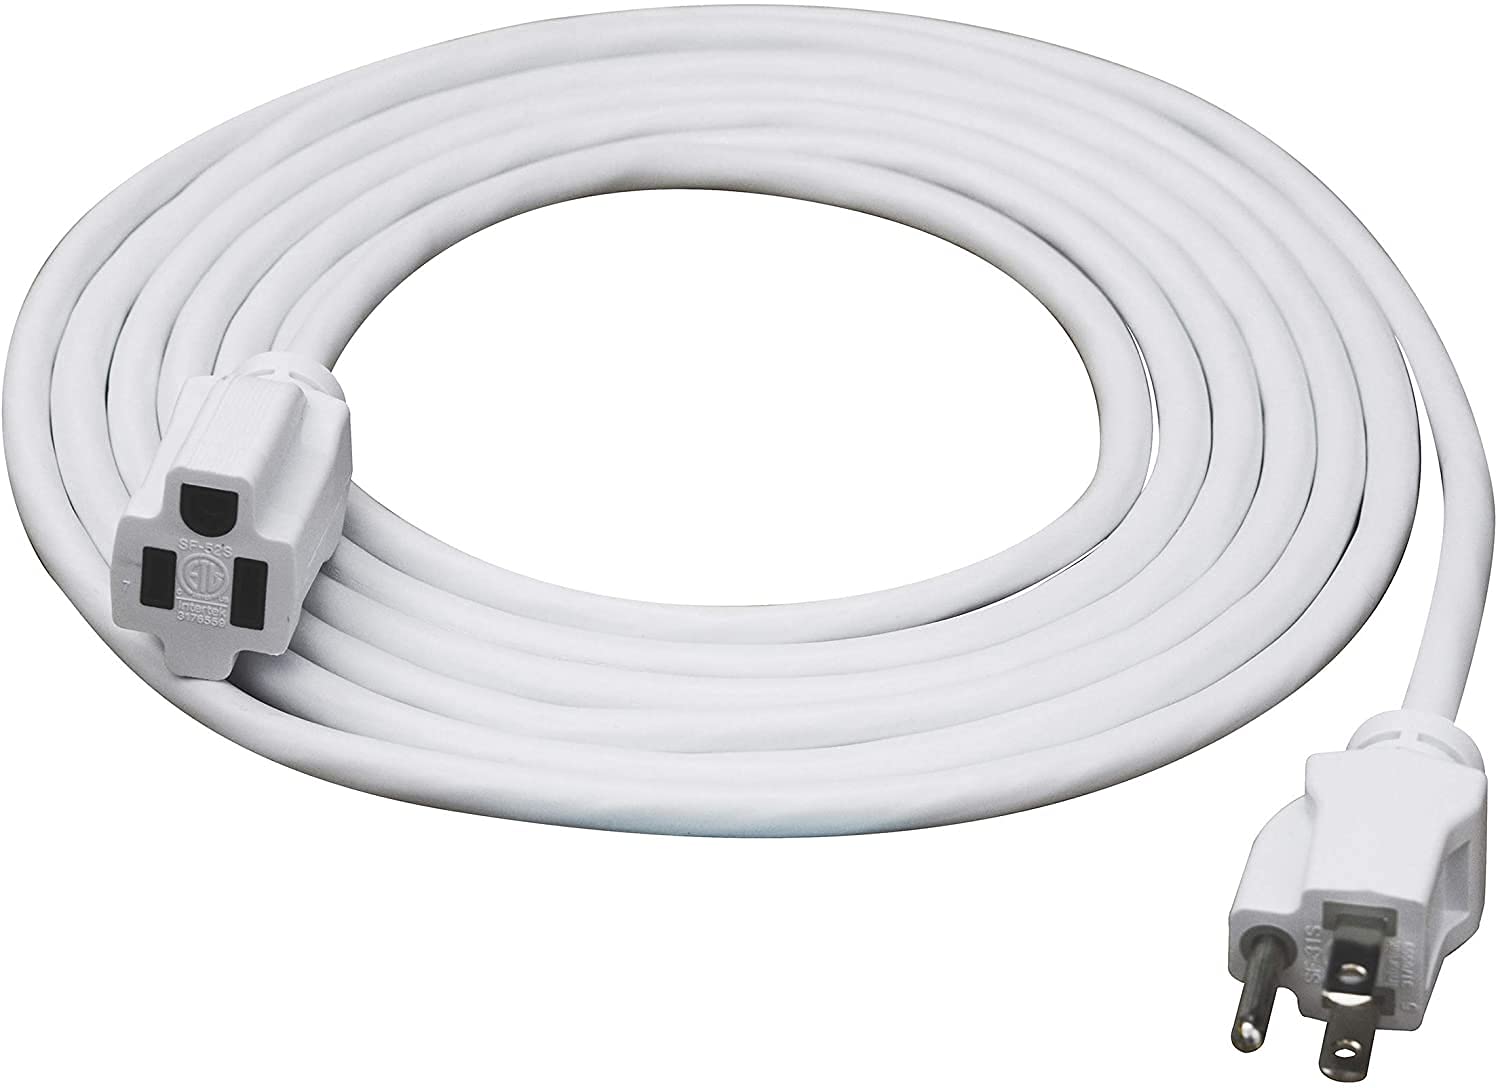 Clear Power 15 ft Indoor/Outdoor Extension Cord 16/3 SJTW, 3-Prong Grounded Plug, General Purpose, White, Water & Weather Resist